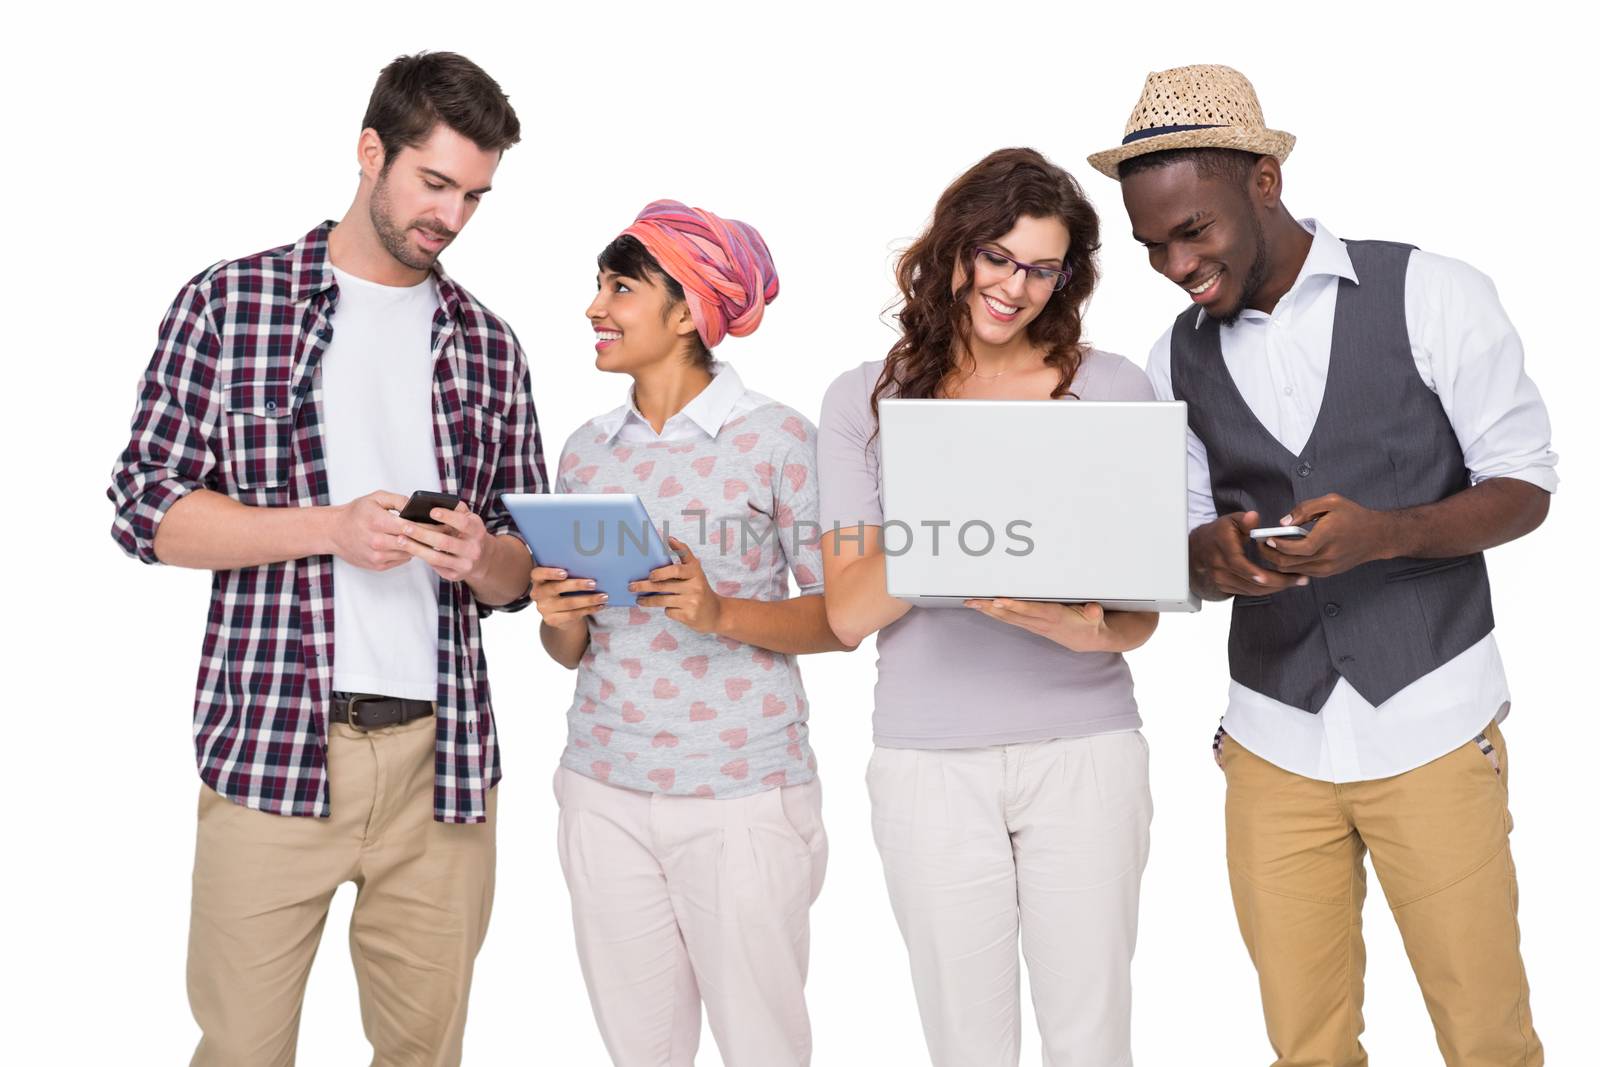 Smiling coworkers with technology interacting together on white background